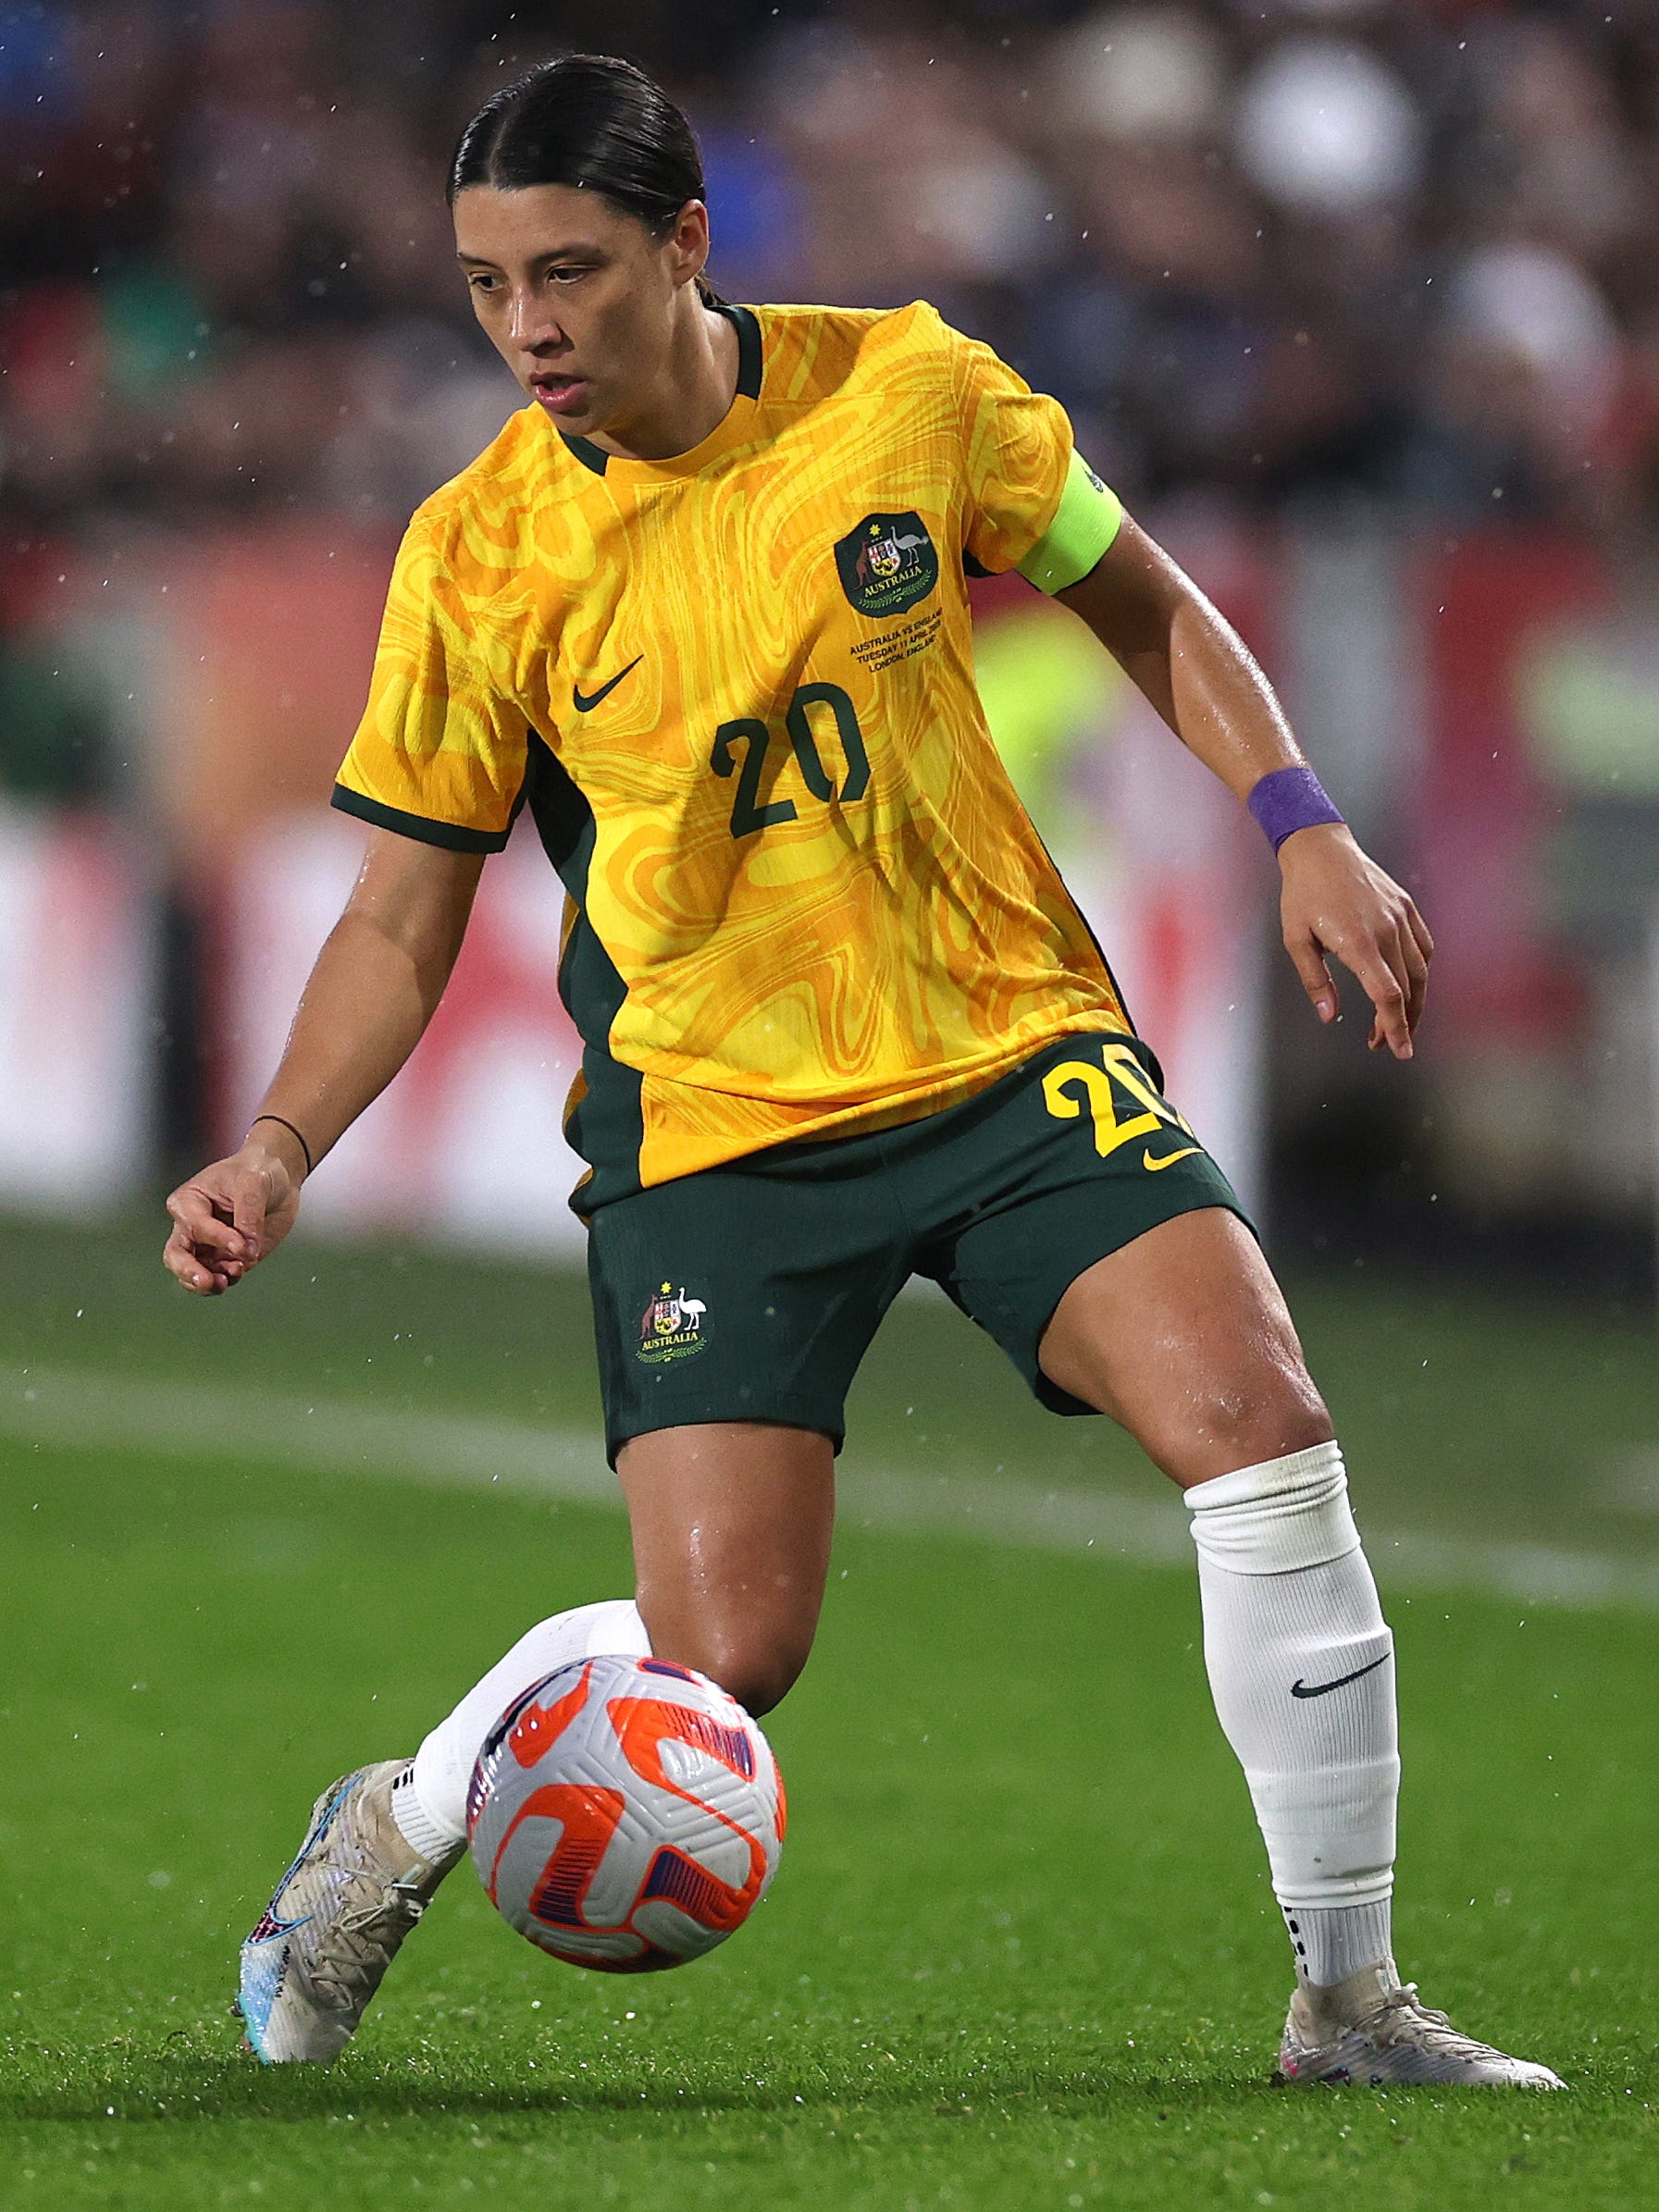 An action image of Sam Kerr playing soccer.